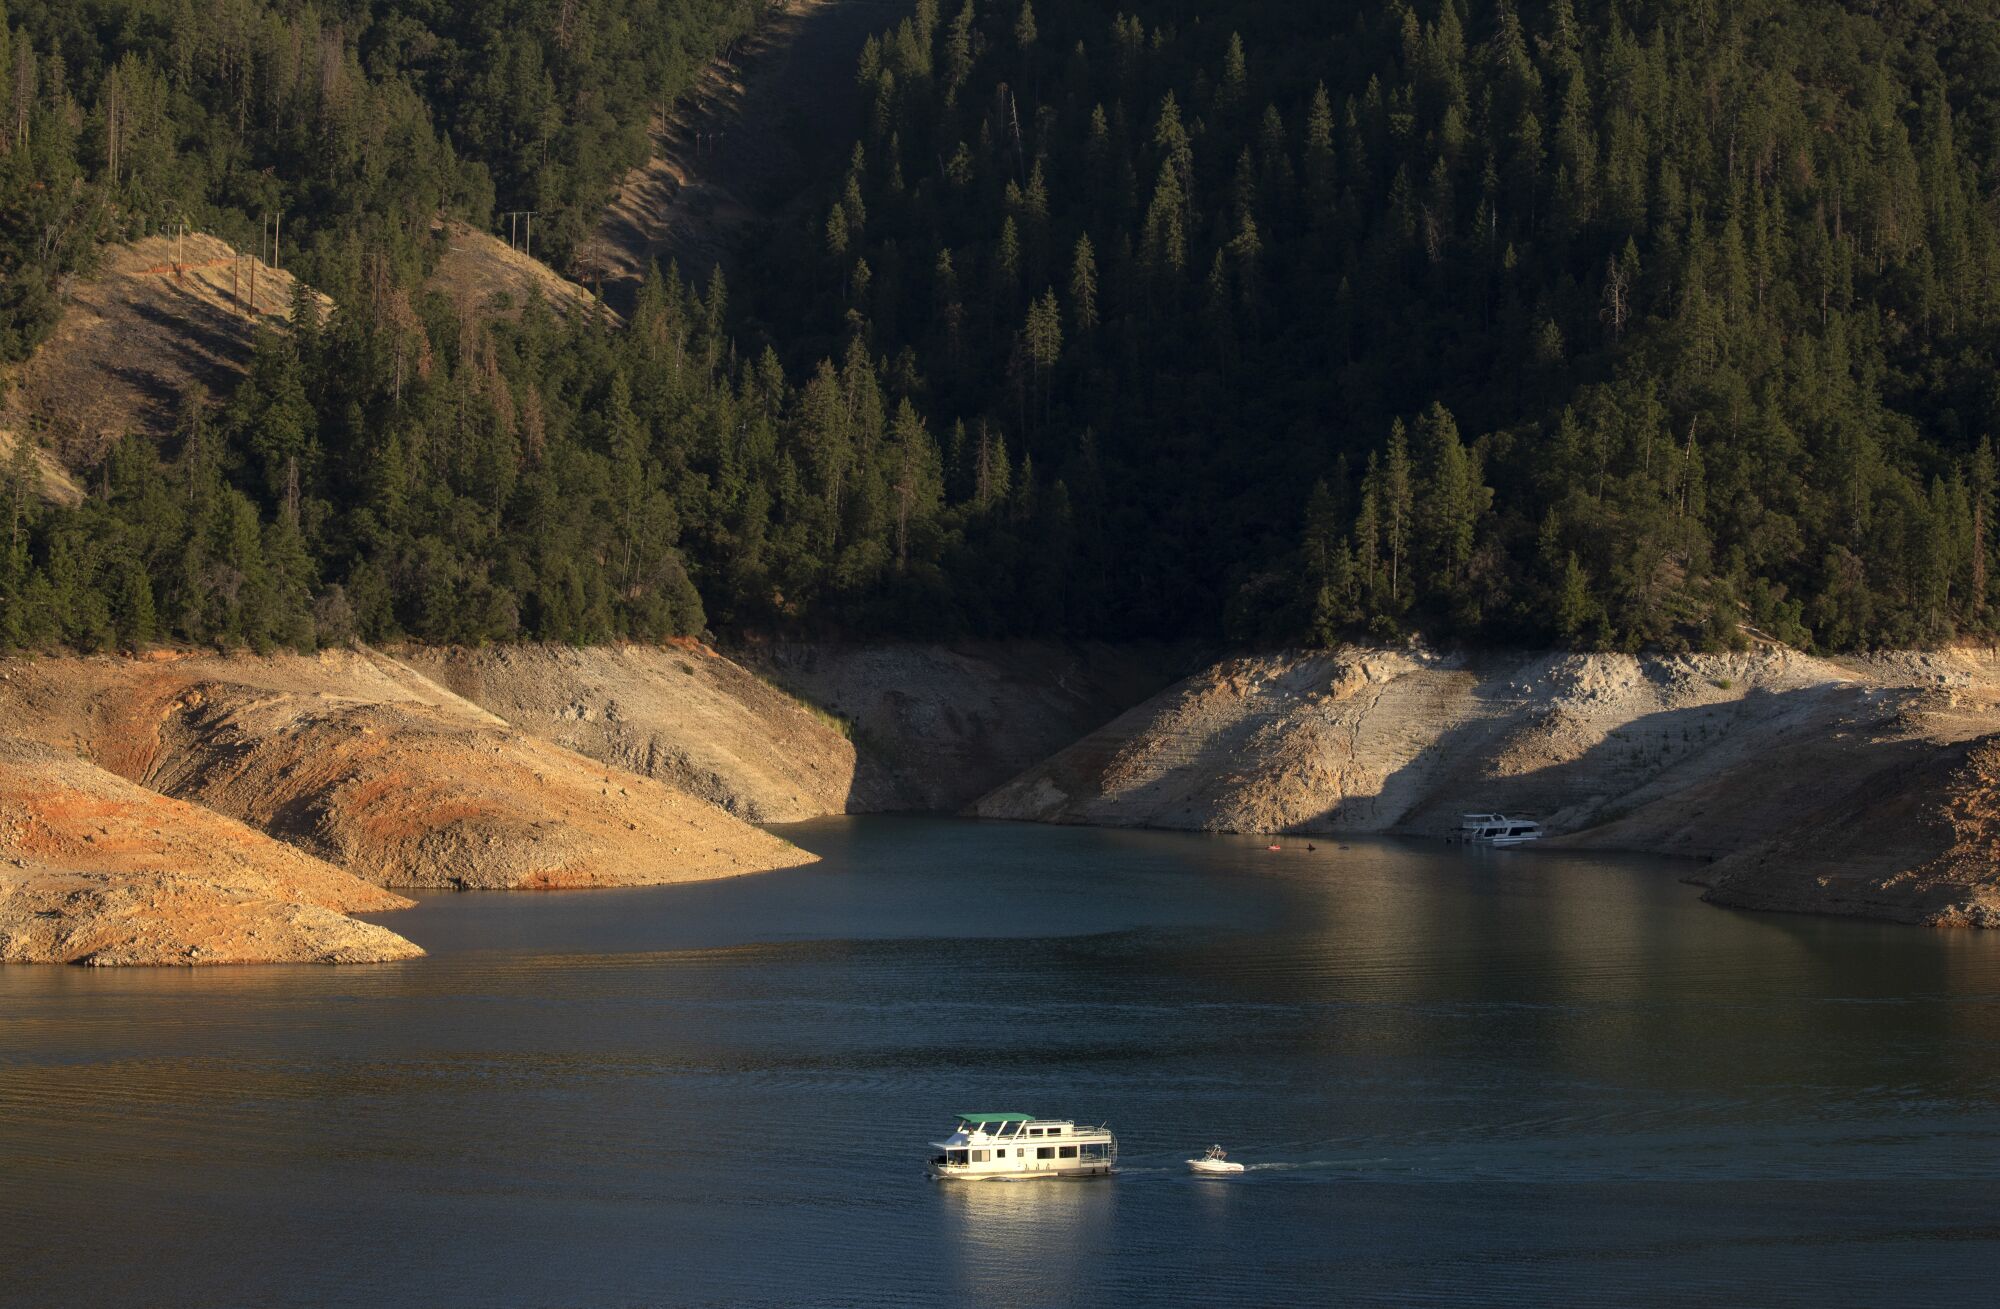 A houseboat is framed by deep bathtub rings from years-long drought at Shasta Lake in California.